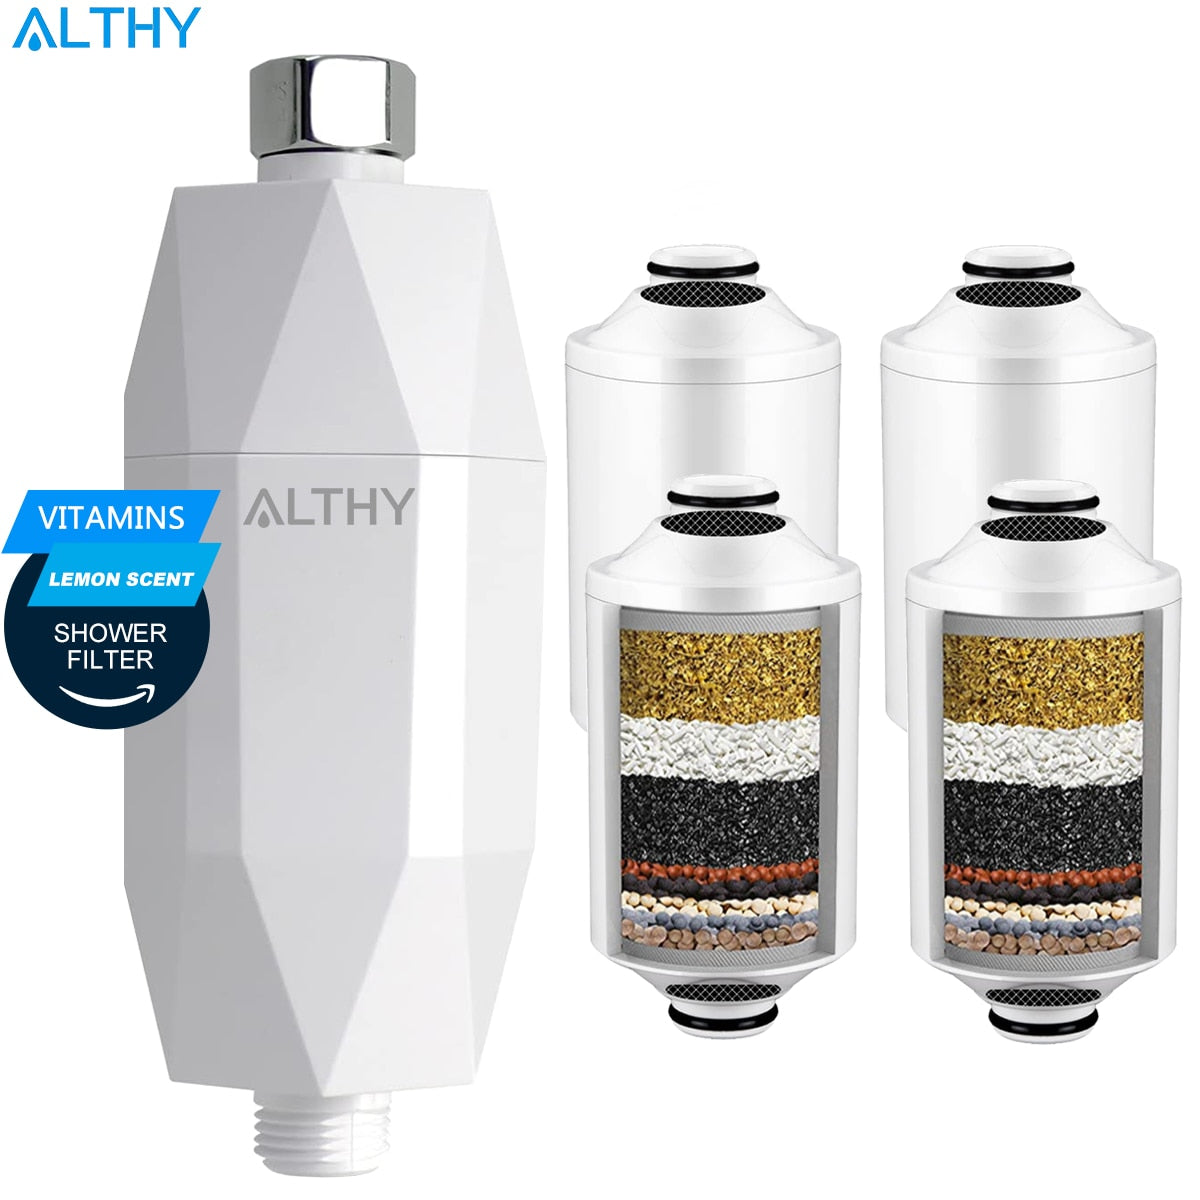 ALTHY Vitamin C Revitalizing Shower Water Filter - Reduces Dry Itchy Skin, Dandruff, Eczema, Dramatically & Improves Skin, Hair  Hardware > Plumbing > Water Dispensing & Filtration 138.52 EZYSELLA SHOP